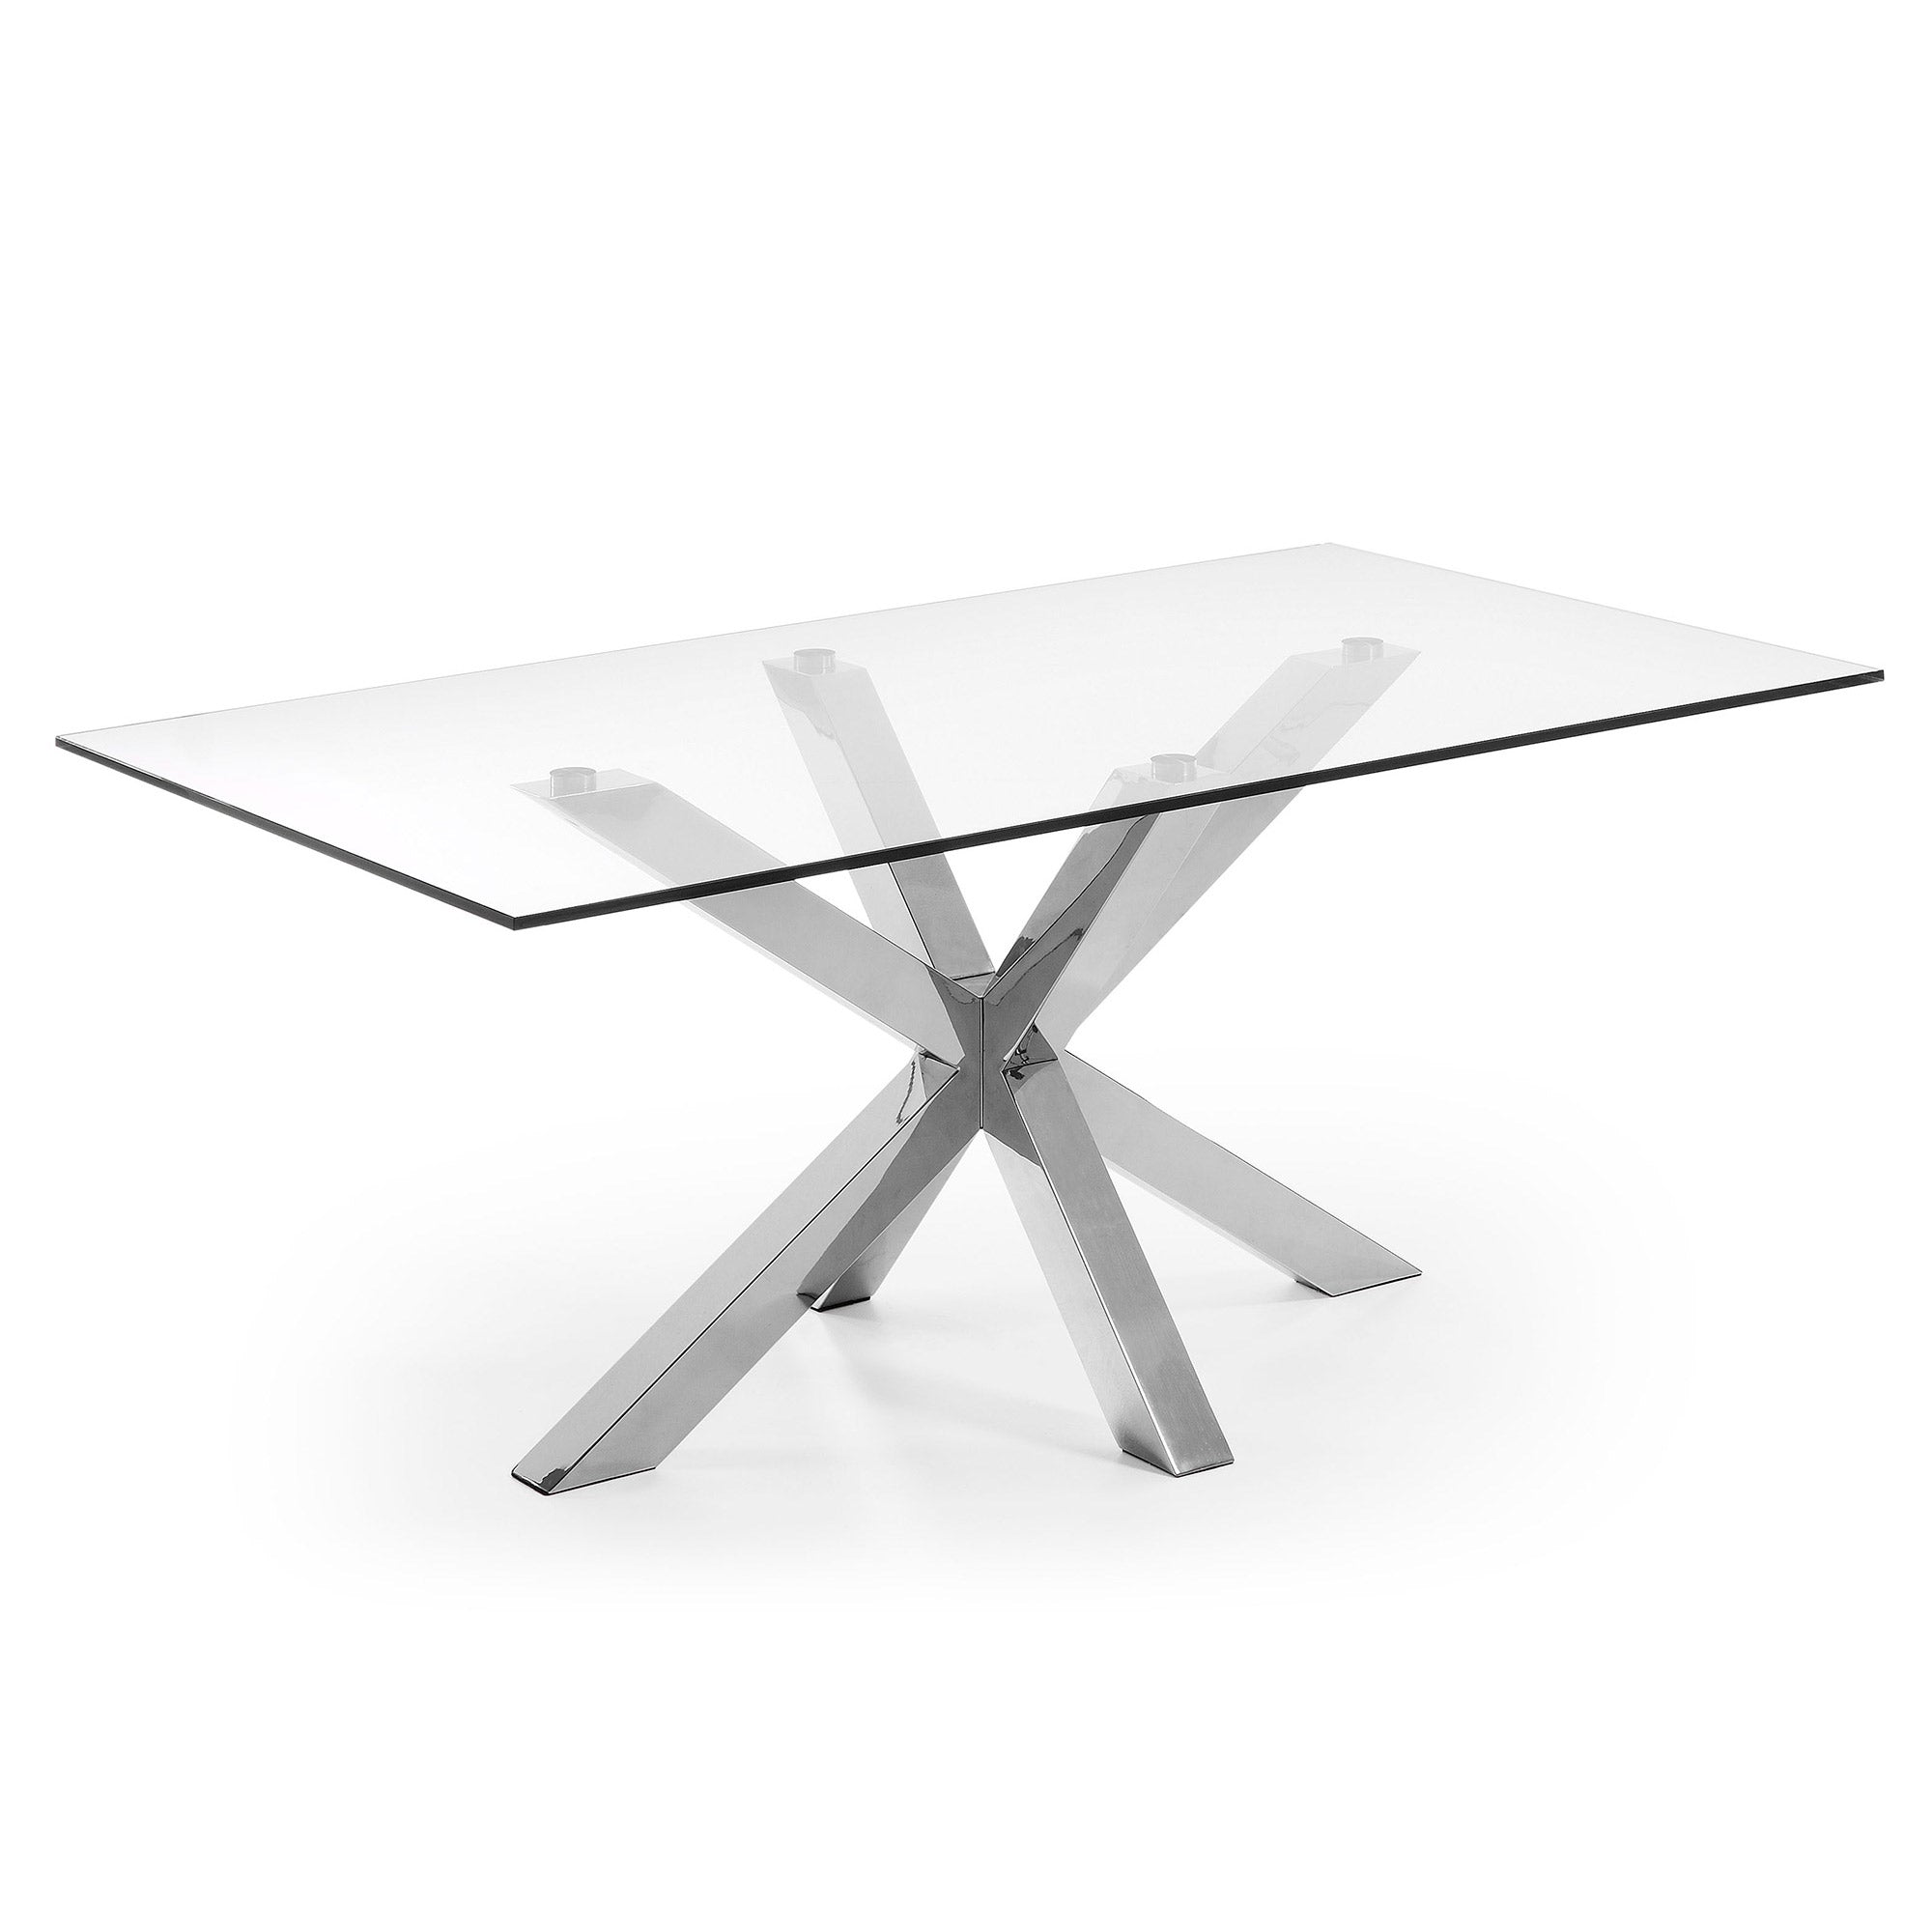 Argo glass table with stainless steel legs 180 x 100 cm